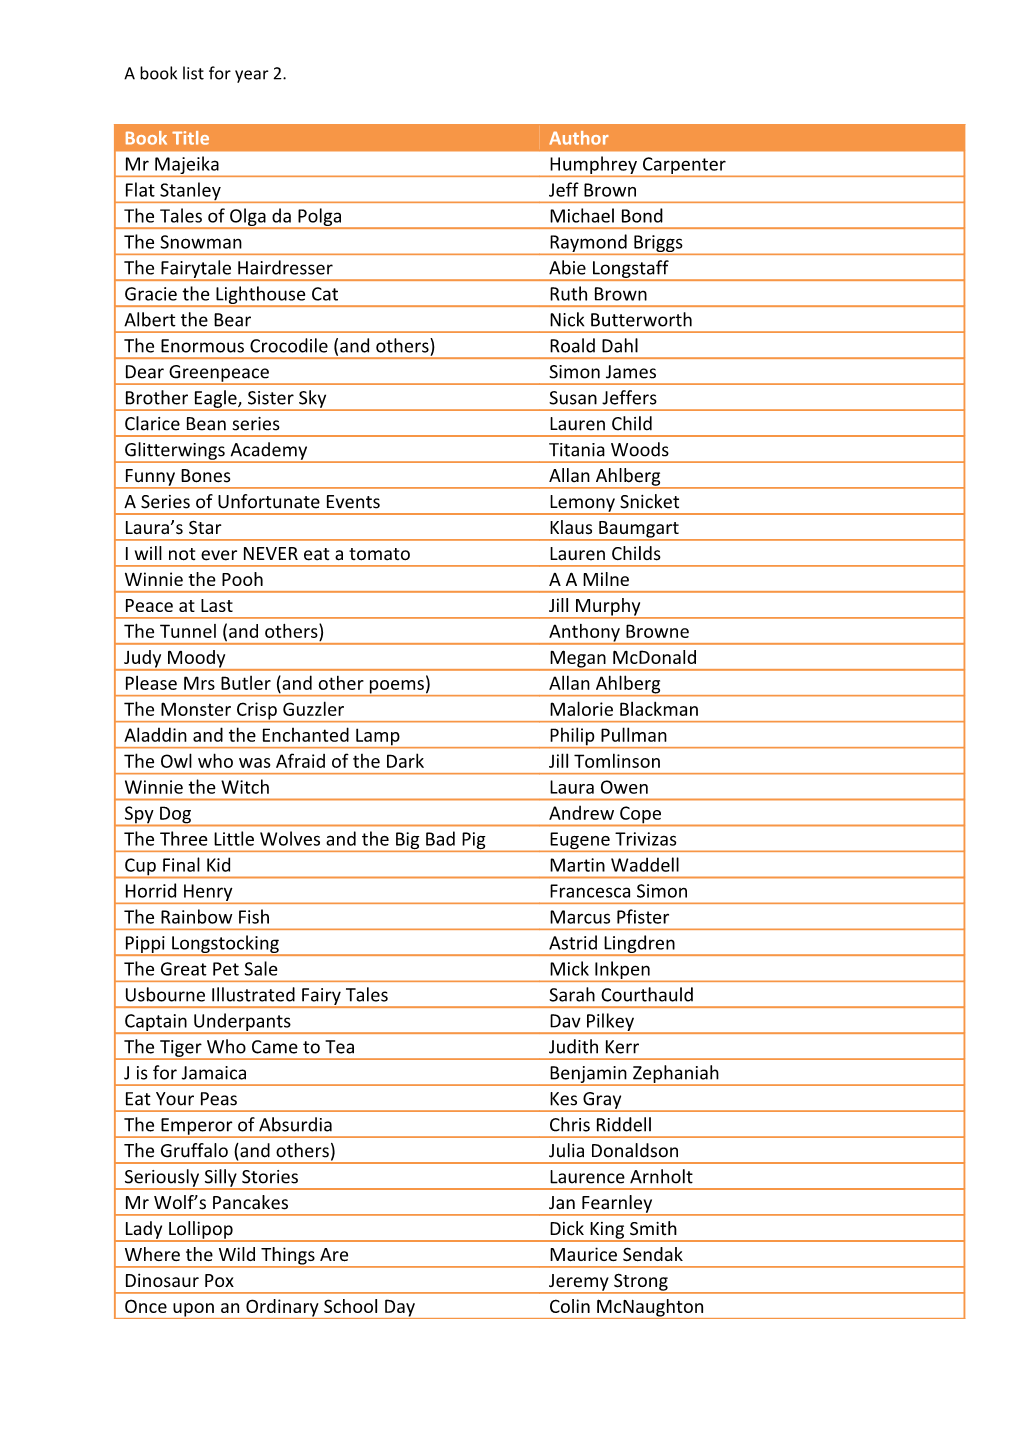 A Book List for Year 2